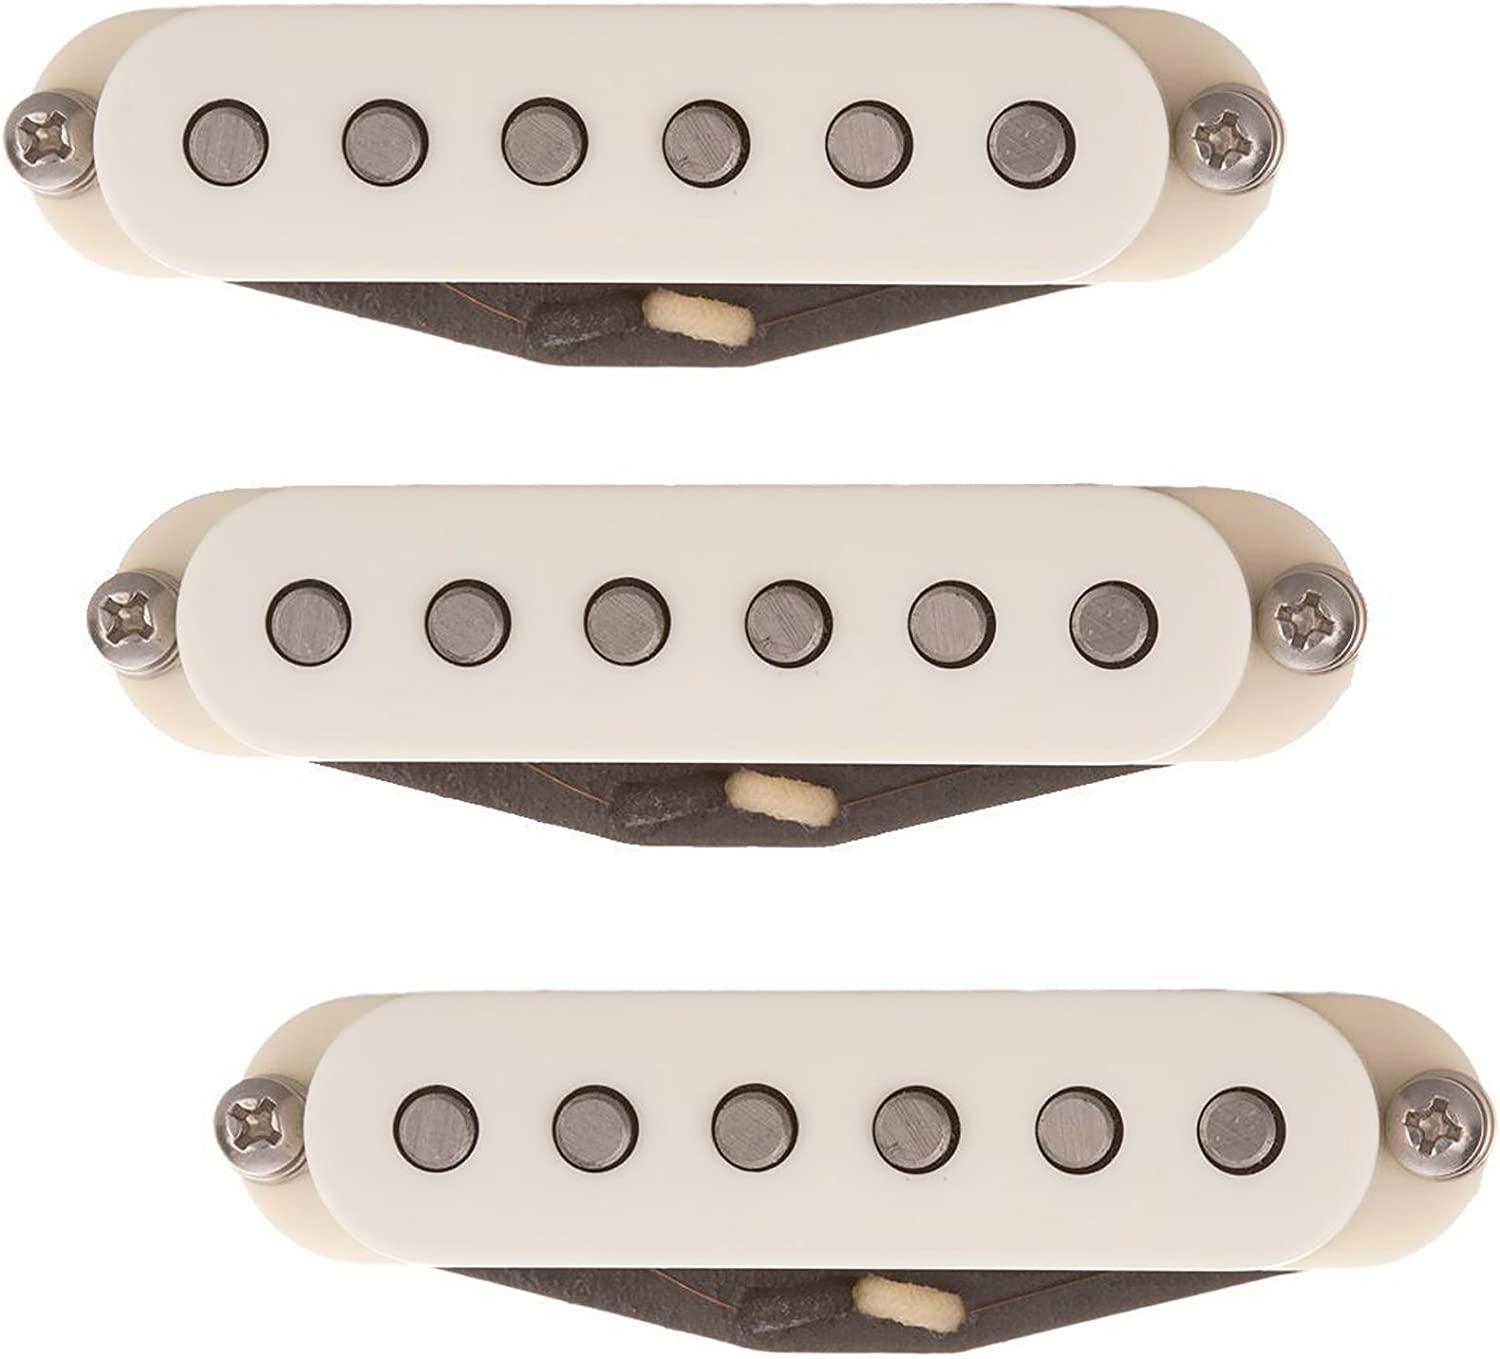 Suhr V60 Low Peak Single Coil Pickup on a white background